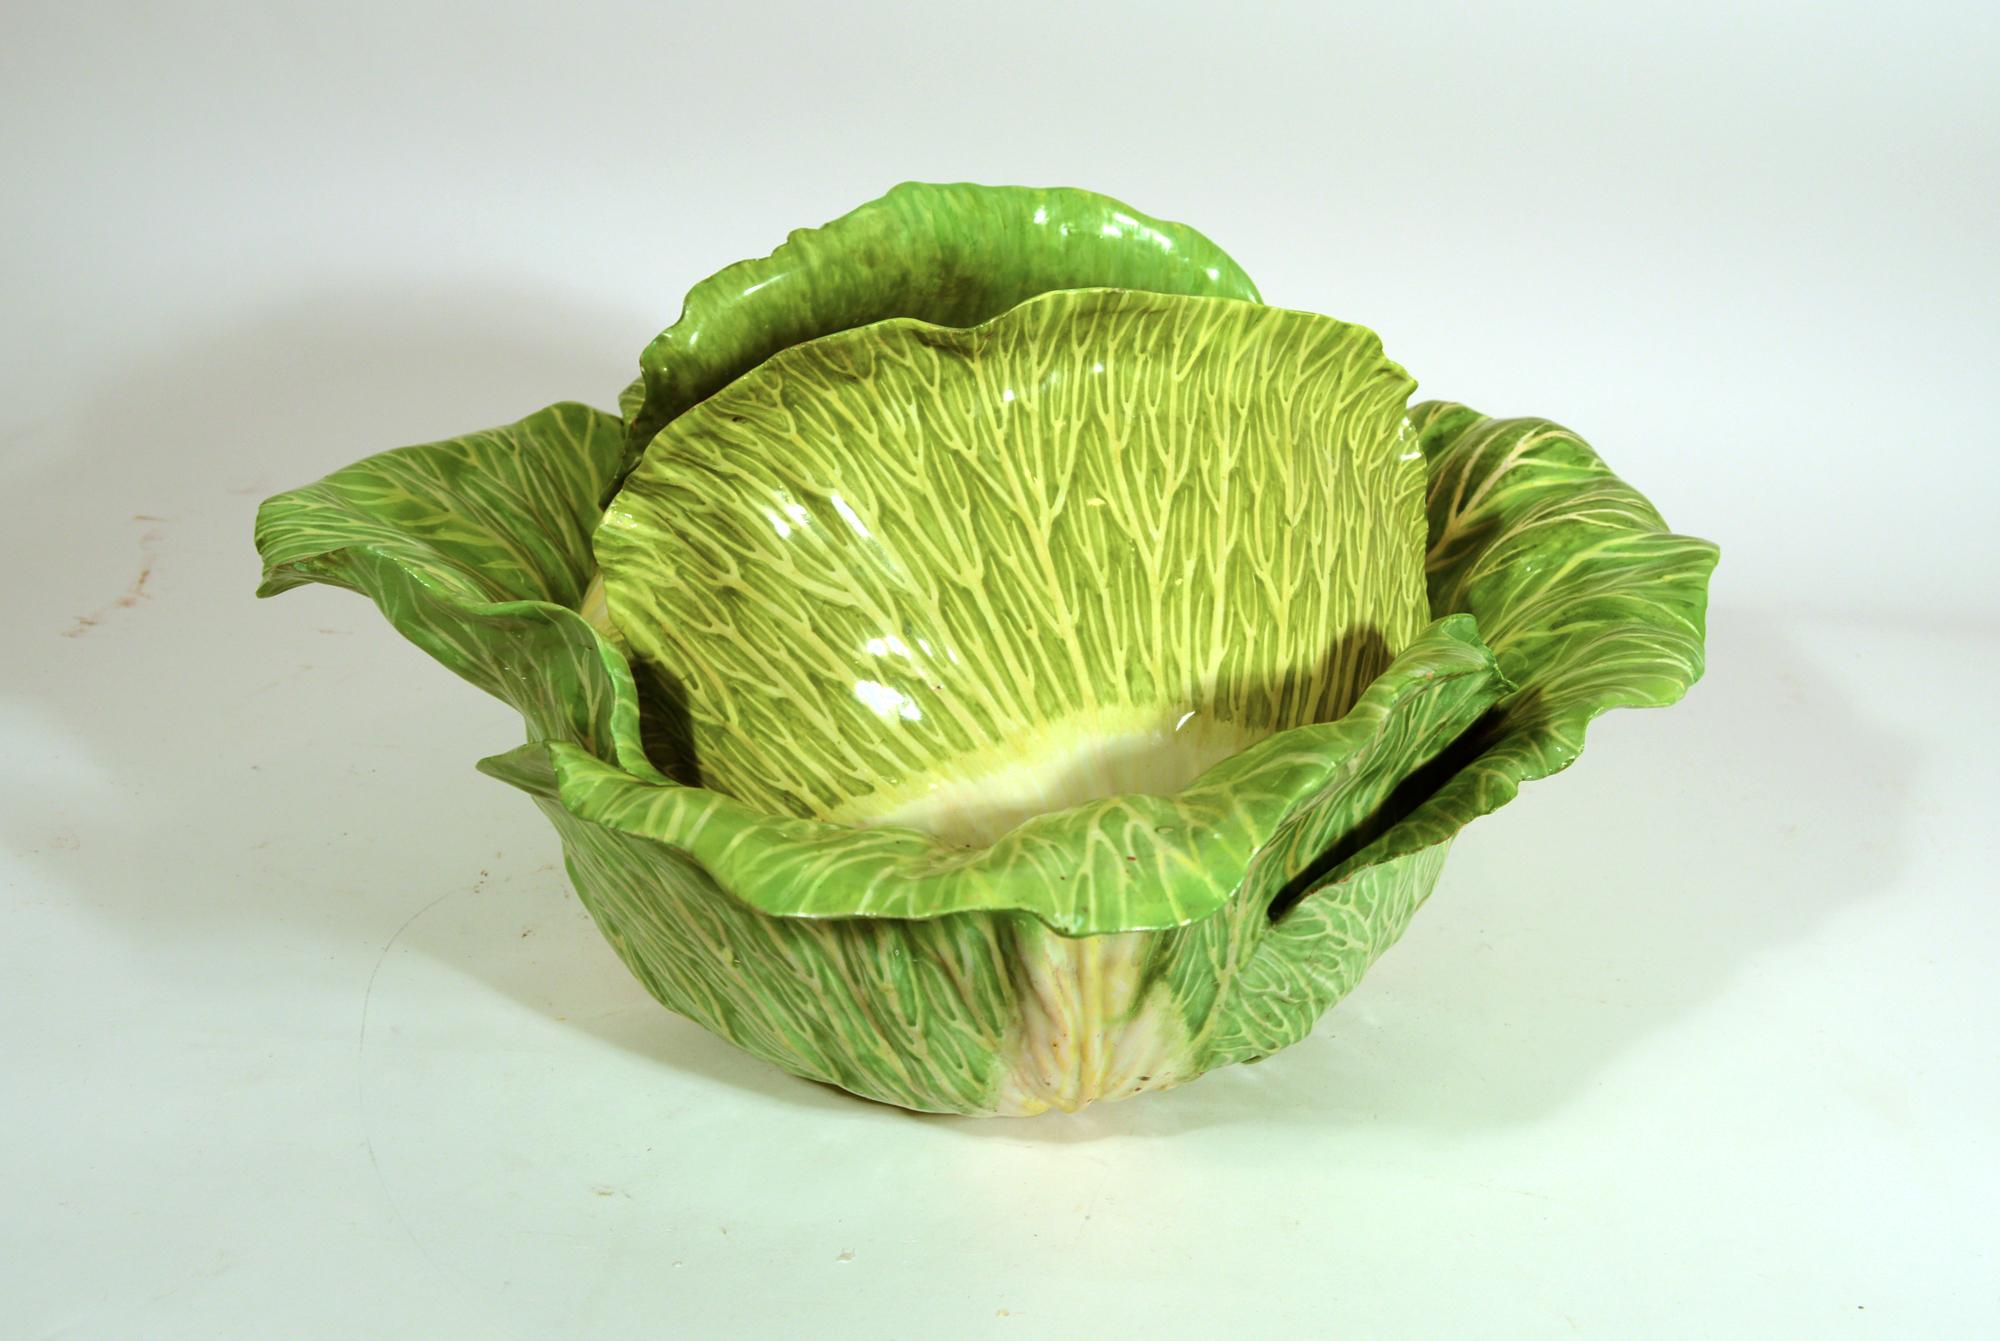 French Faience Tromp L'oeil cabbage leaf tureen & cover,
Paul-Antoine Hannong, Hannong Factory, Strasbourg, Alsace, France.
1748-1754

The massive (17 1/2 inches across) tureen is in the form of a large cabbage naturalistically modeled and